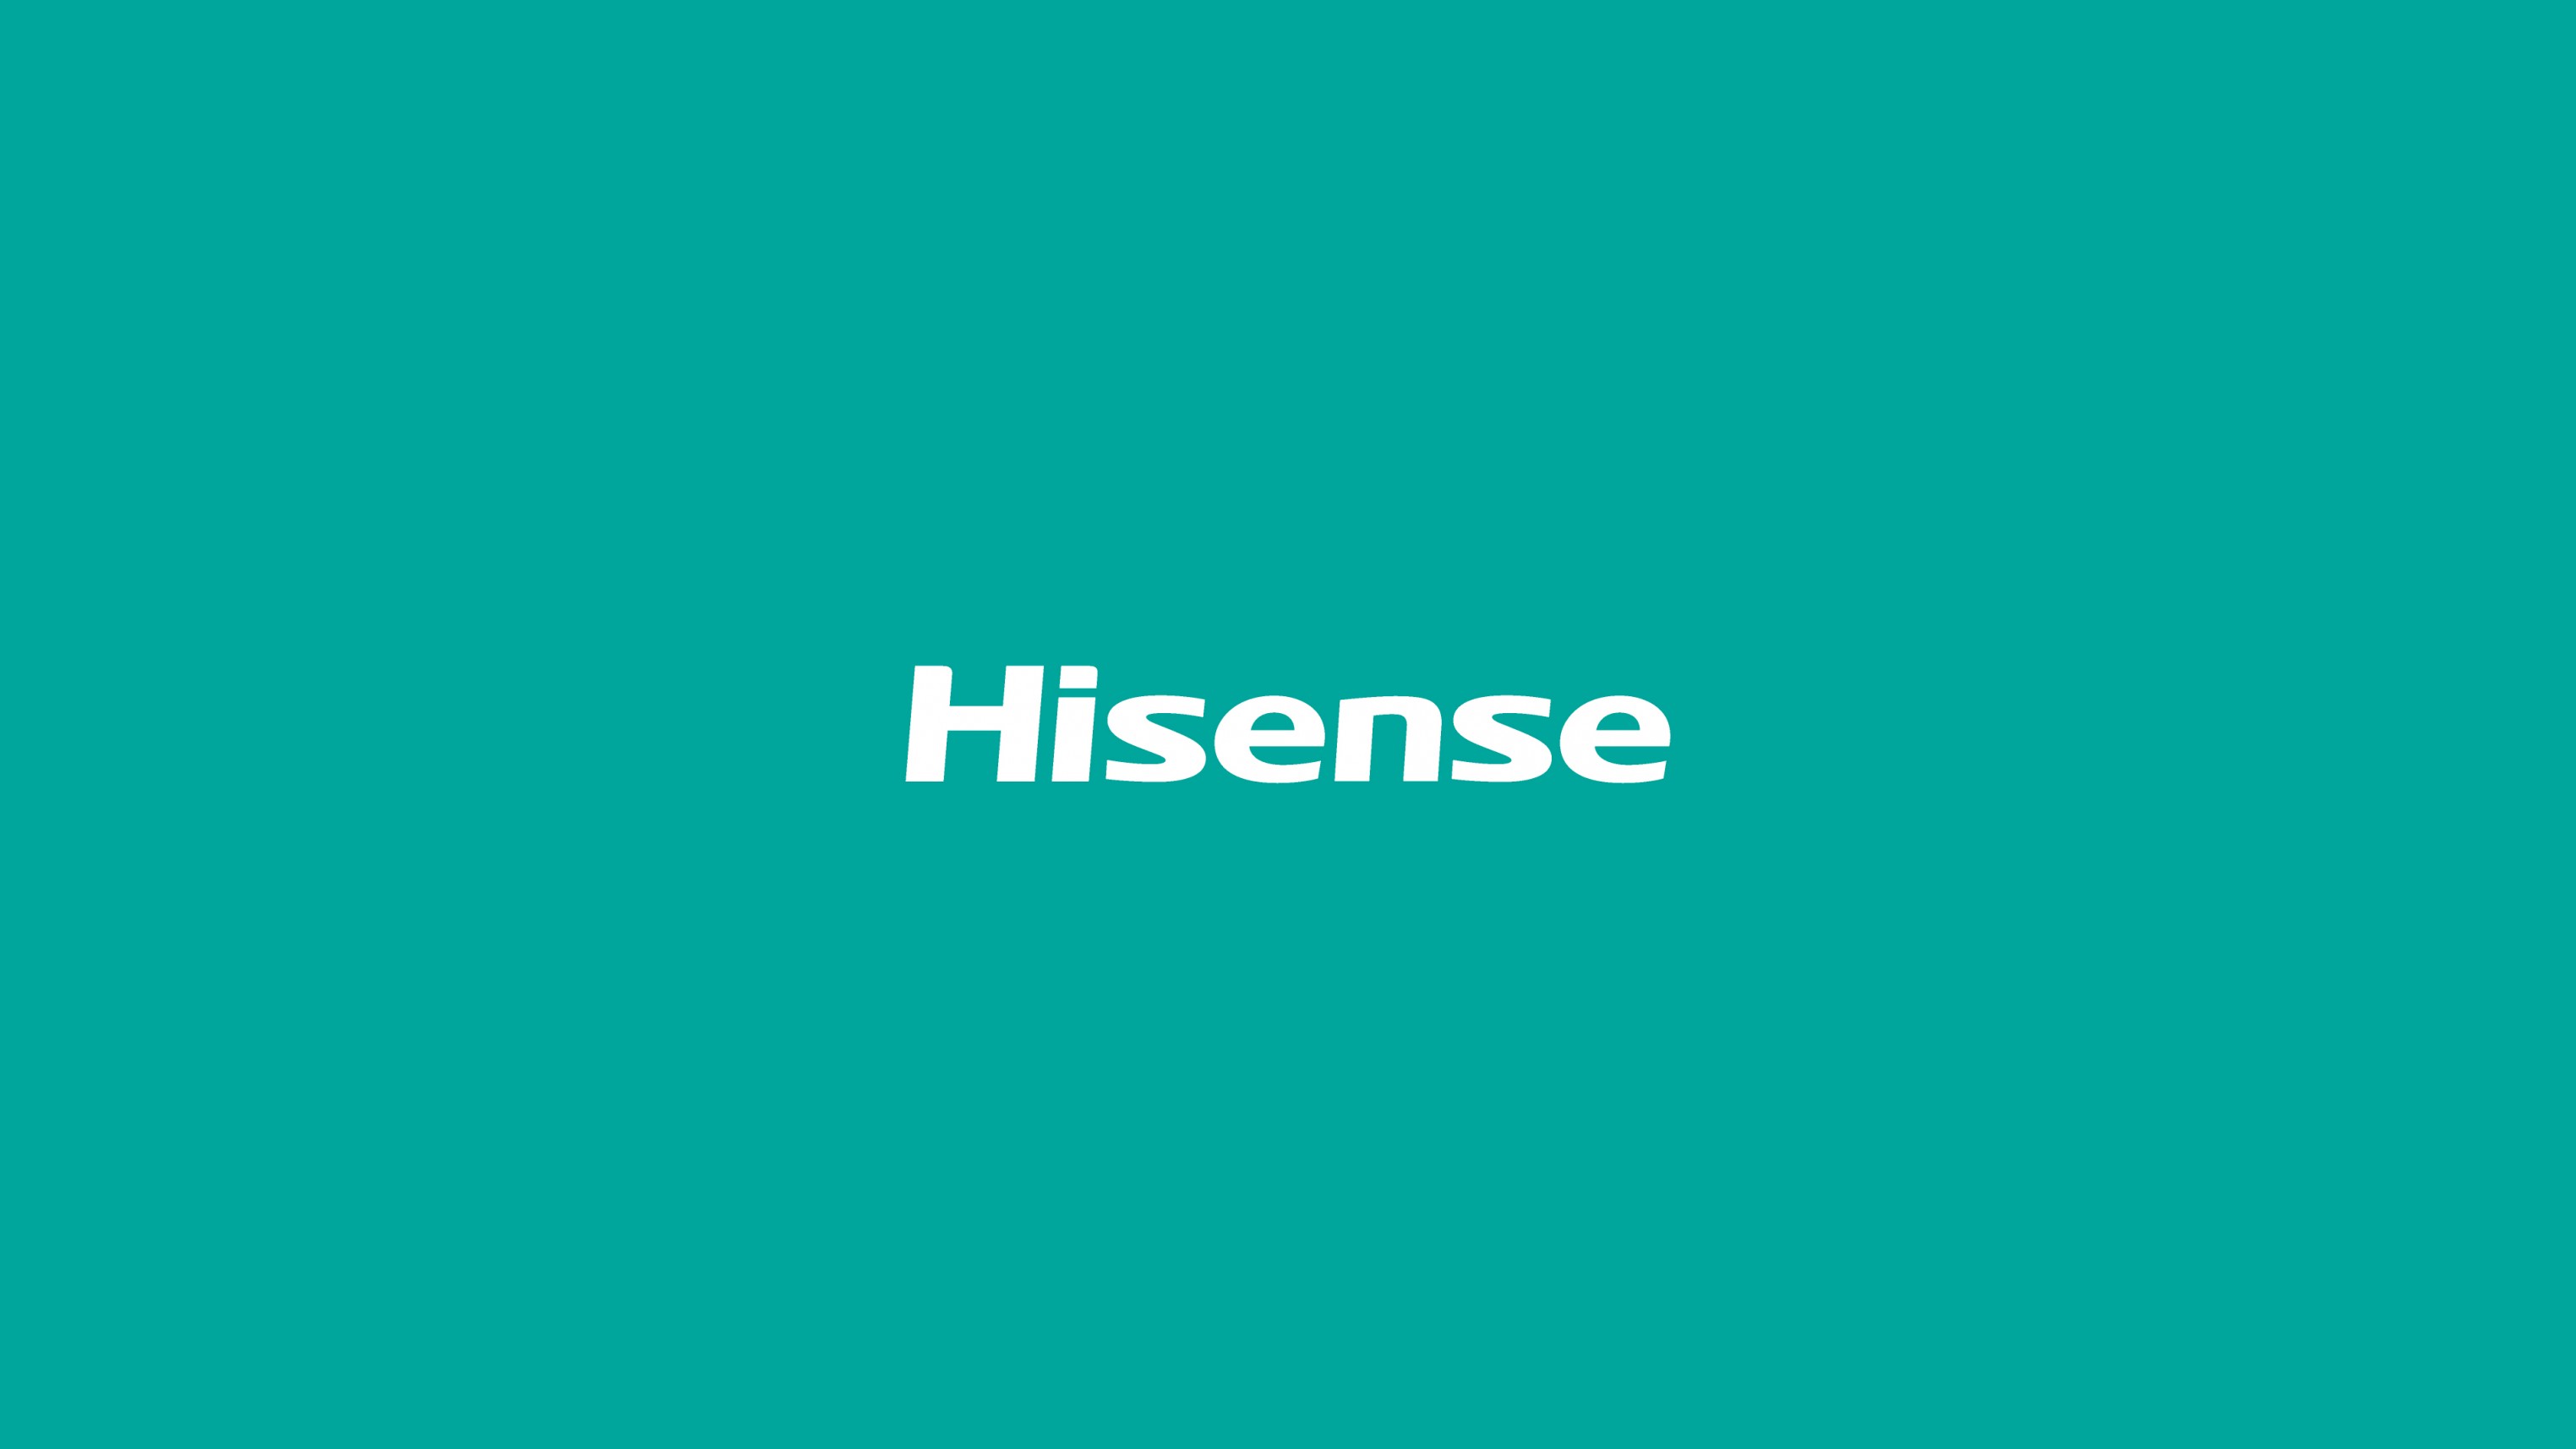 Hisense announces its biggest year end bonanza offer and introduces a new ‘Simple Life’ series washing machine with steam sterilization in India